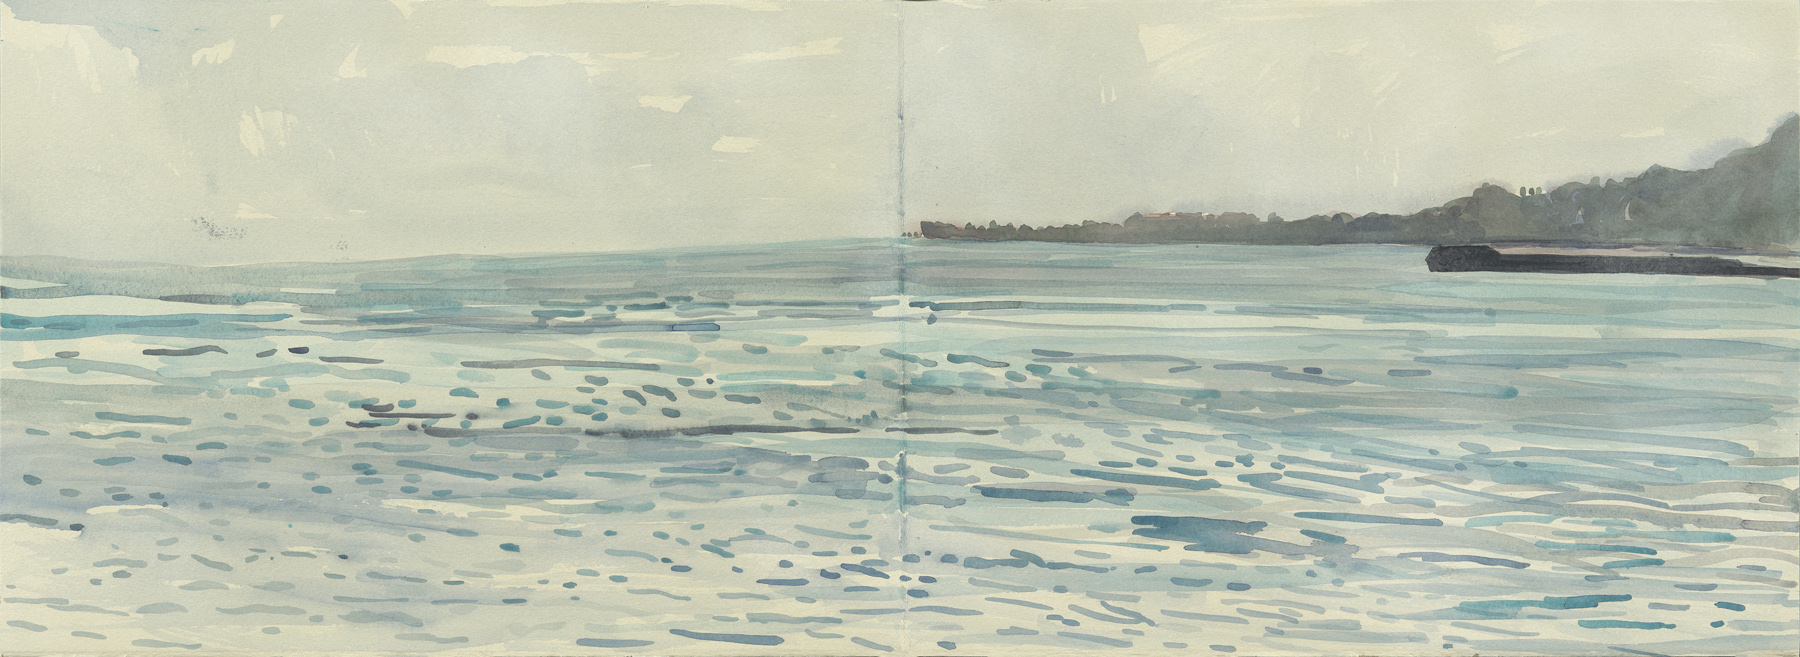   Early Fall Looking South on Lake Michigan,  2016, watercolor on paper, 30” x 11” 